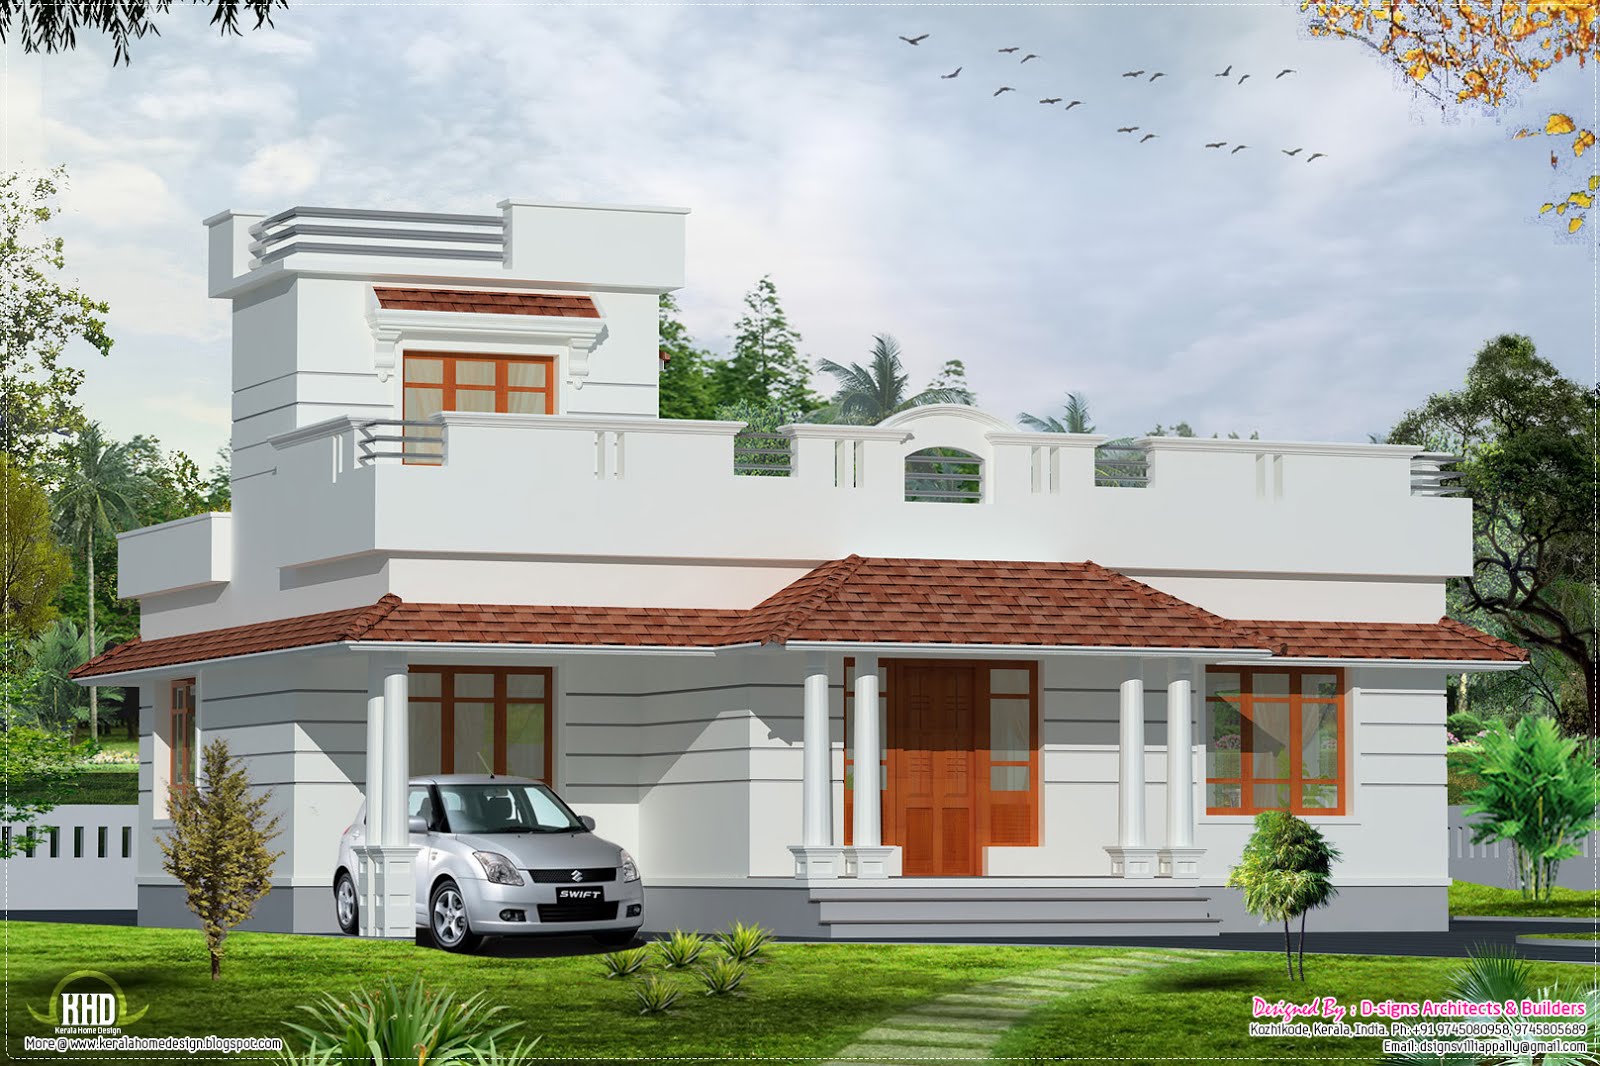  Kerala  style budget home  in 1200 sq feet House  Design  Plans 